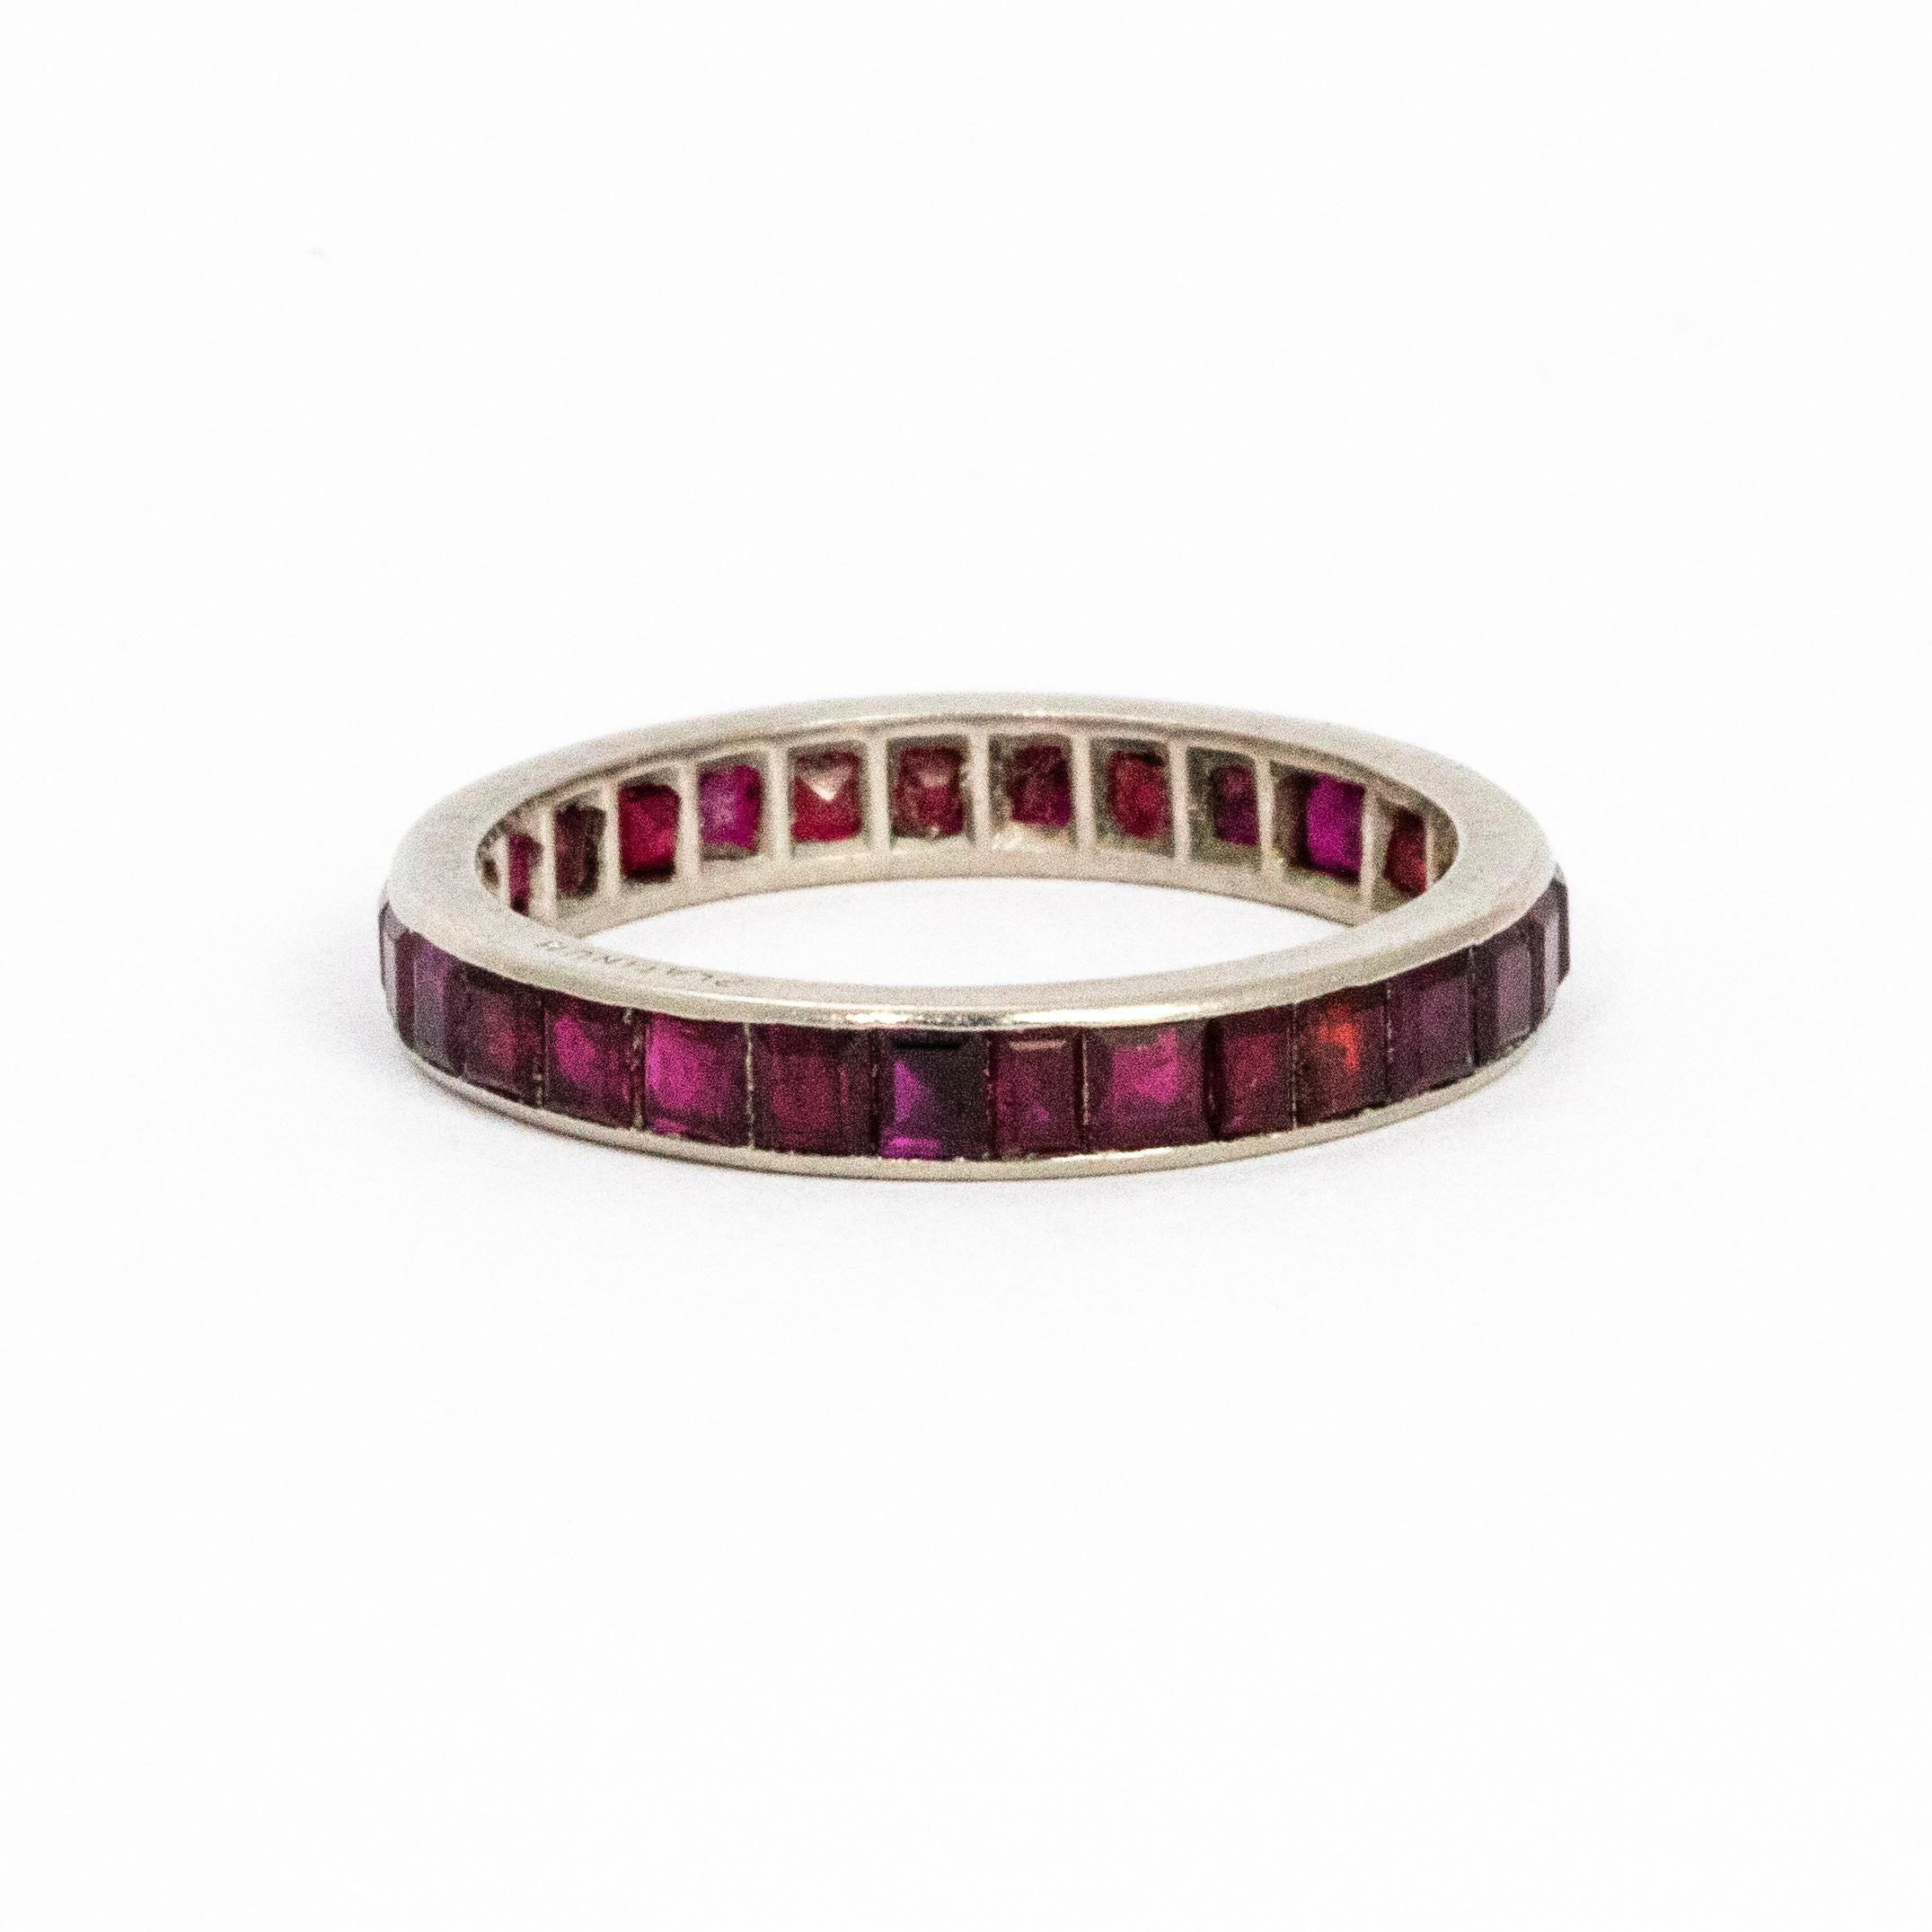 Glossy platinum eternity band holding a halo of glistening rubies.

Ring Size: N 1/2 or 7